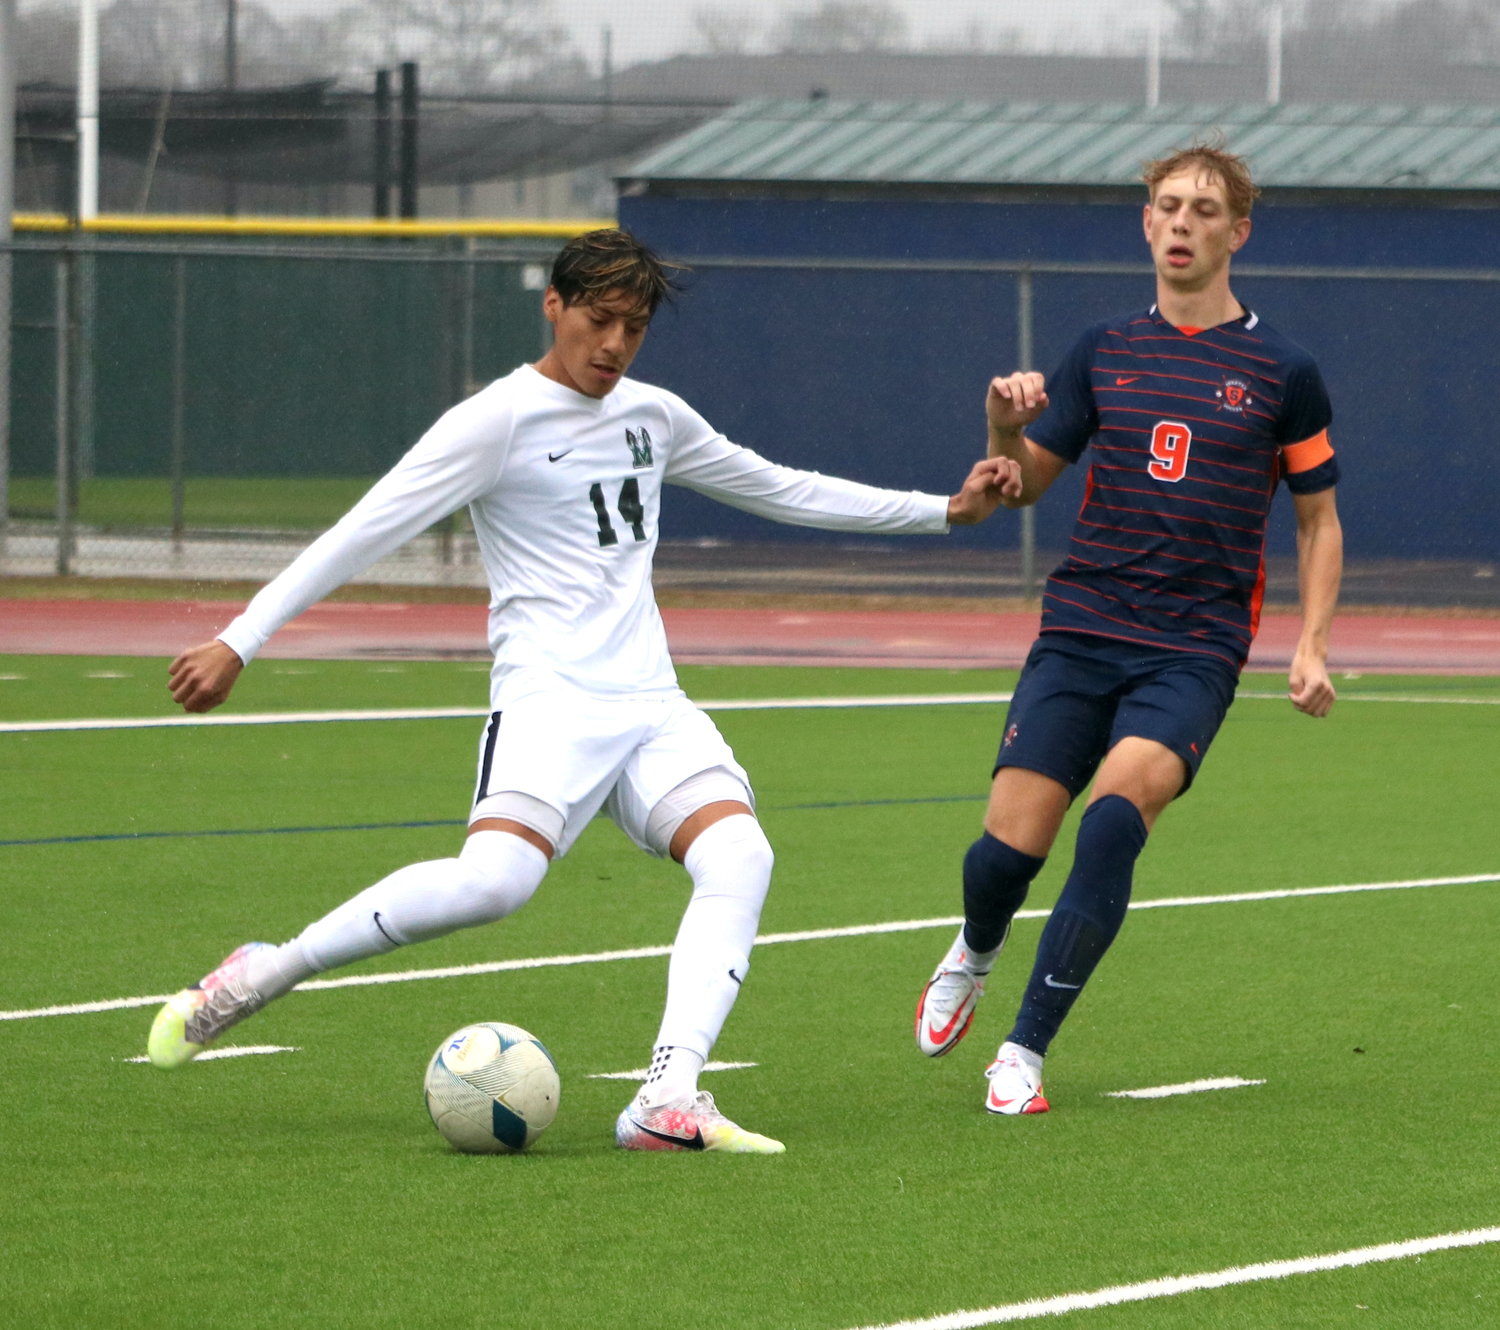 Danile Solorio clears a ball as Hunter Merritt closes in during Saturday's game between Seven Lakes and Mayde Creek at the Seven Lakes soccer field.